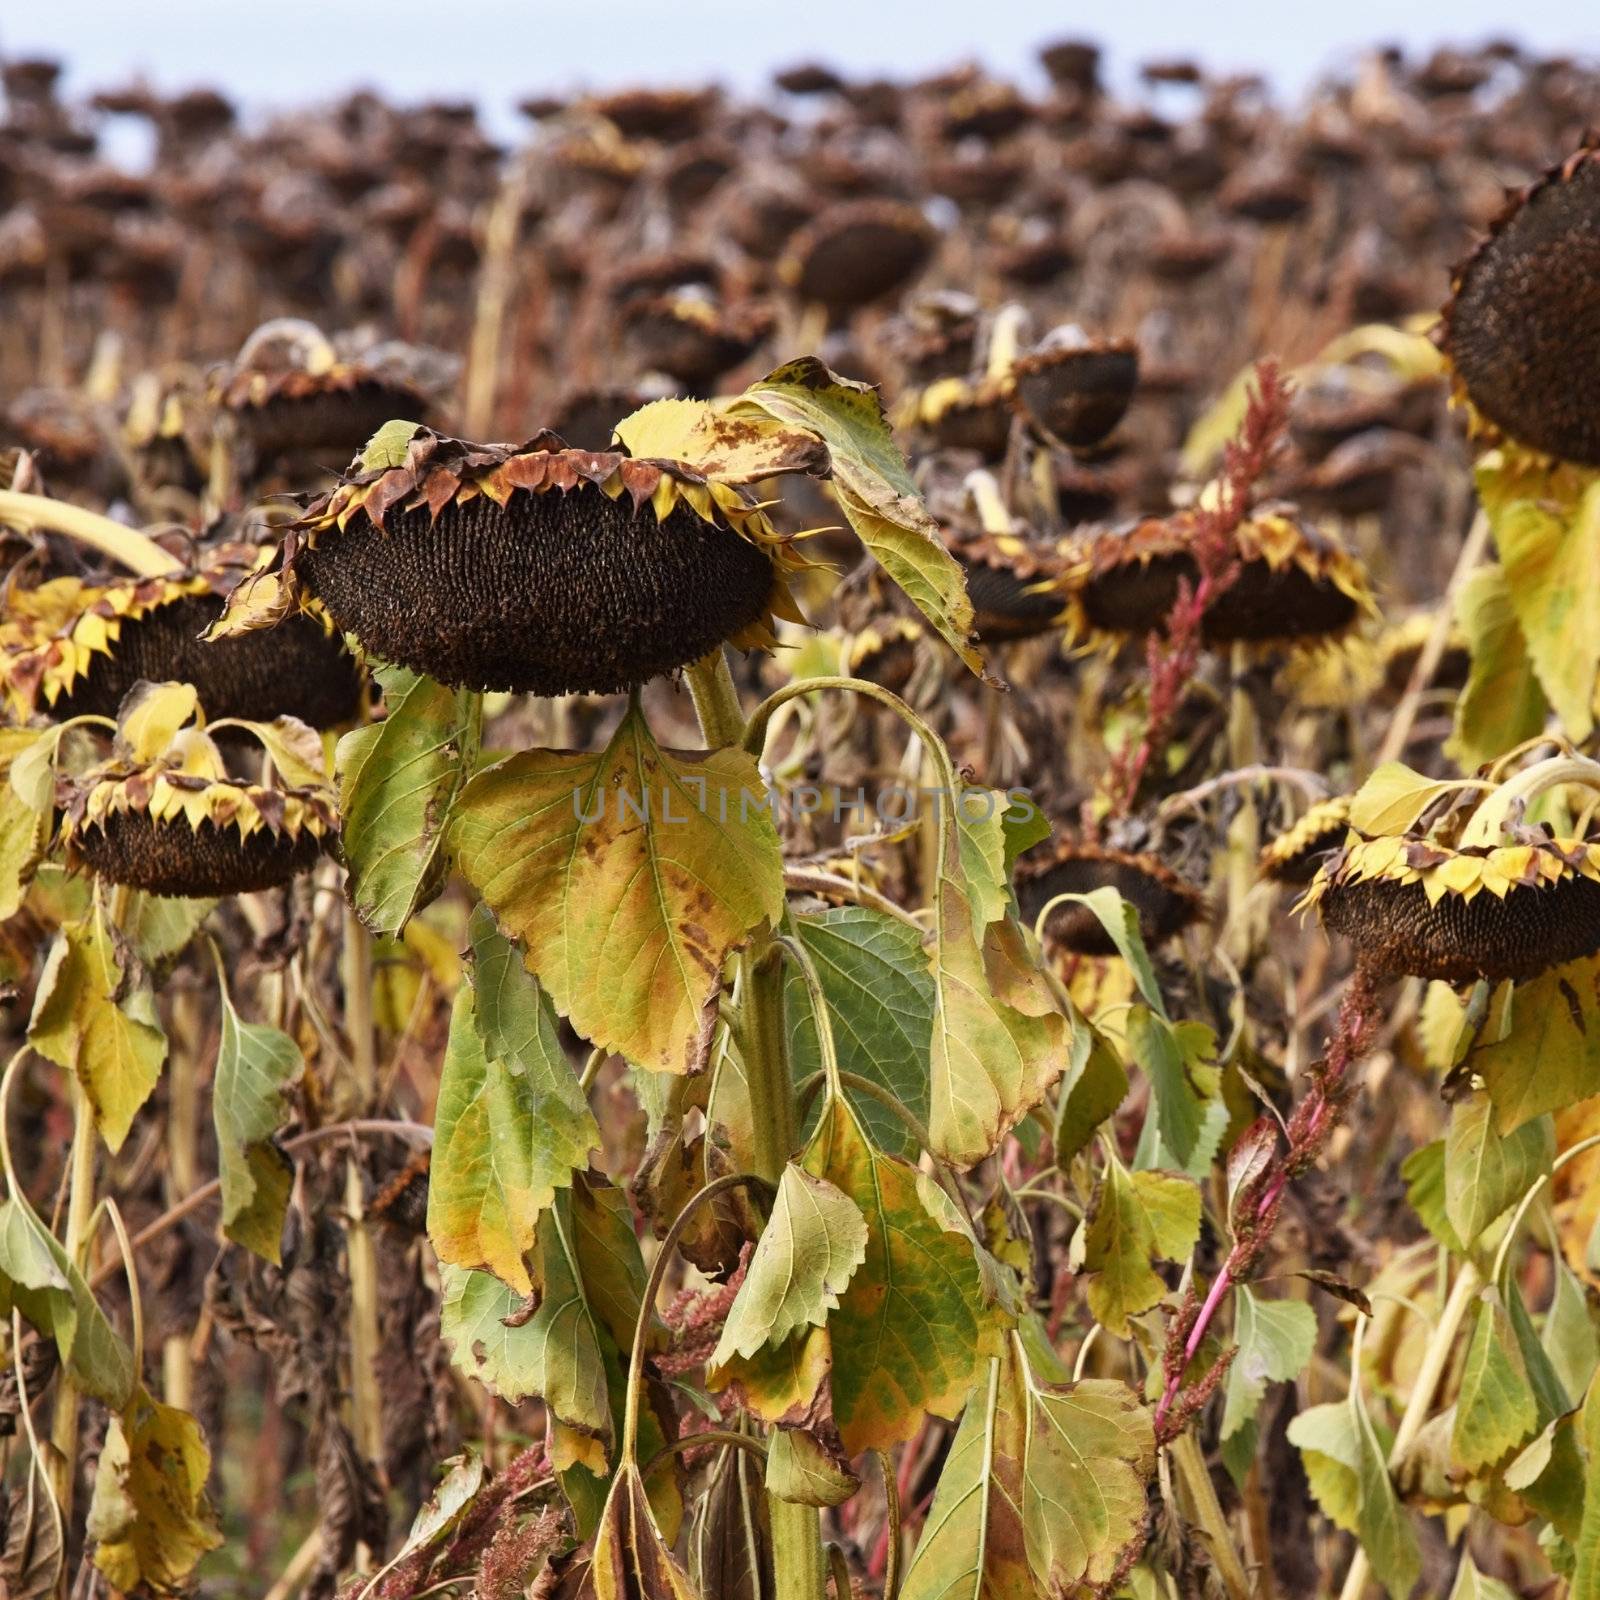 A field of ripened sunflowers ready for the harvesting of their seeds